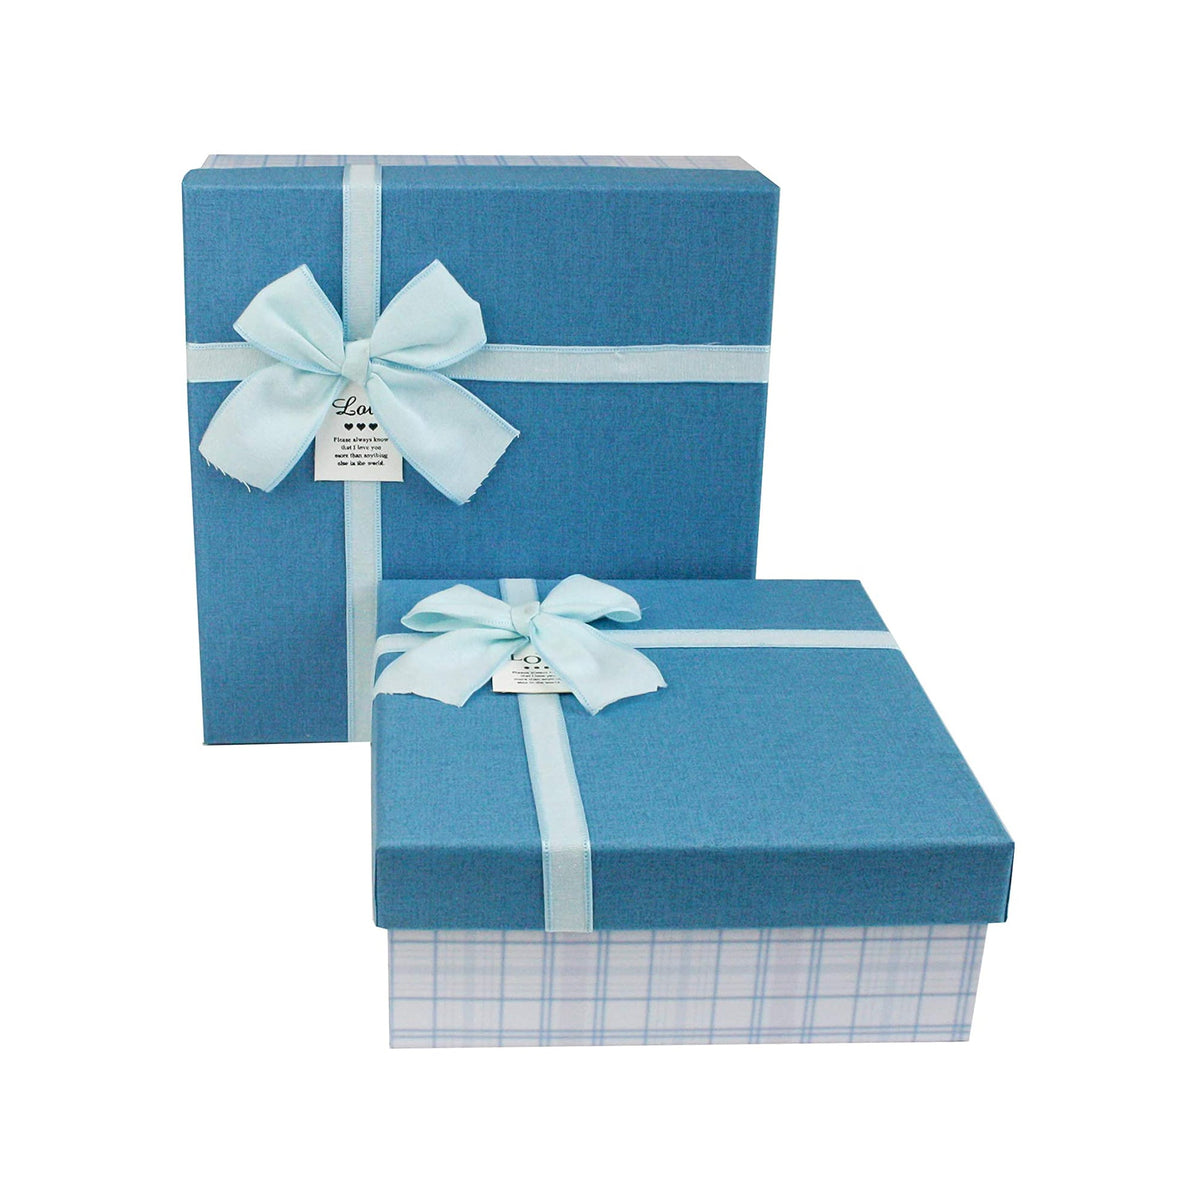 Set of 2 Blue Chequered Gift Boxes